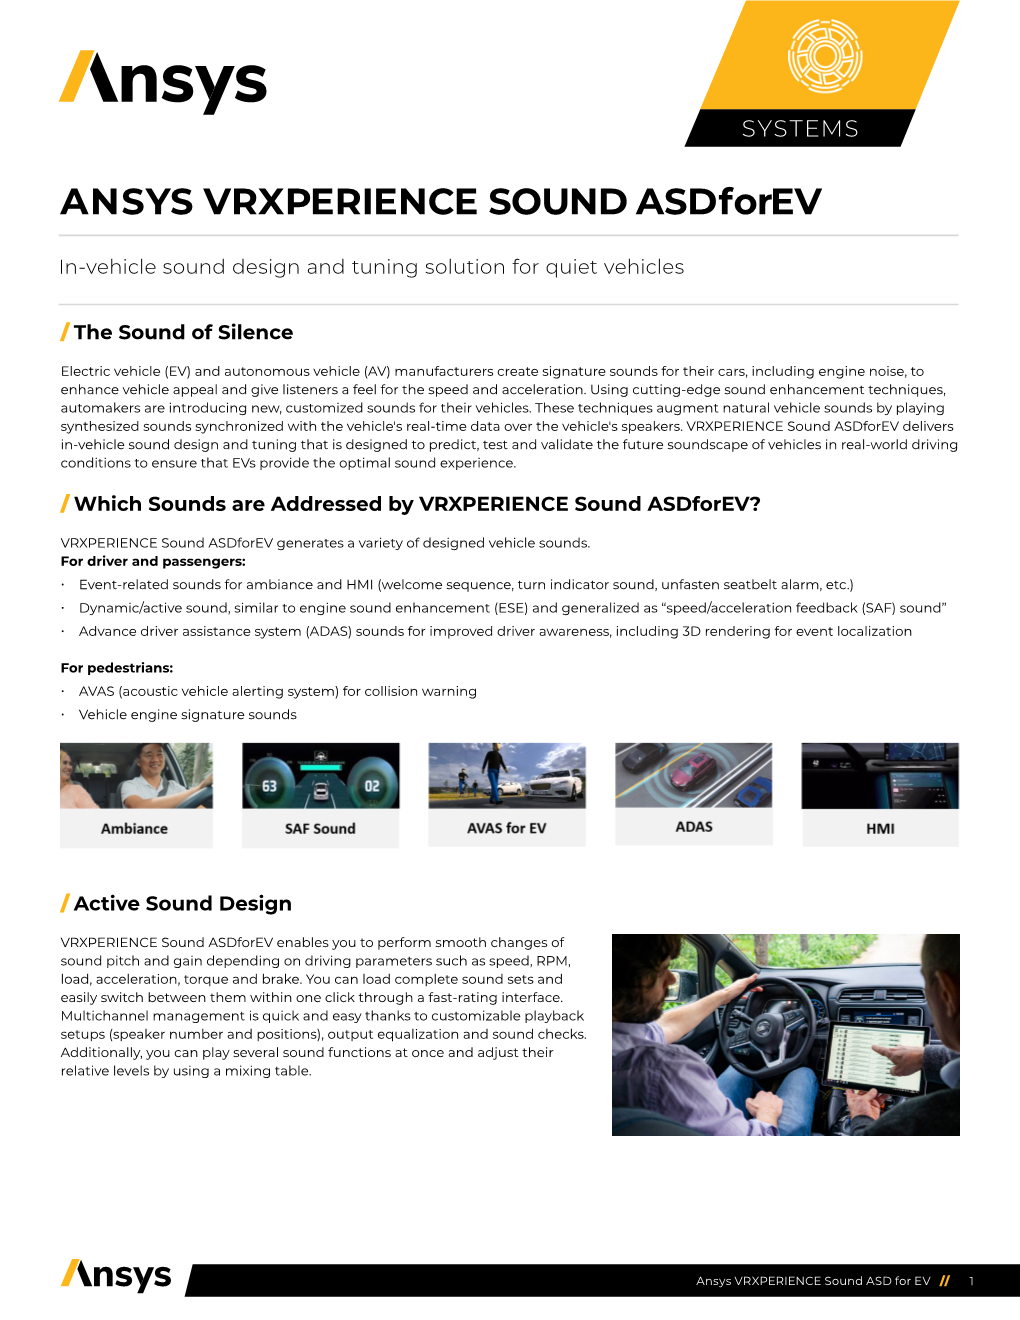 ANSYS VRXPERIENCE SOUND Asdforev